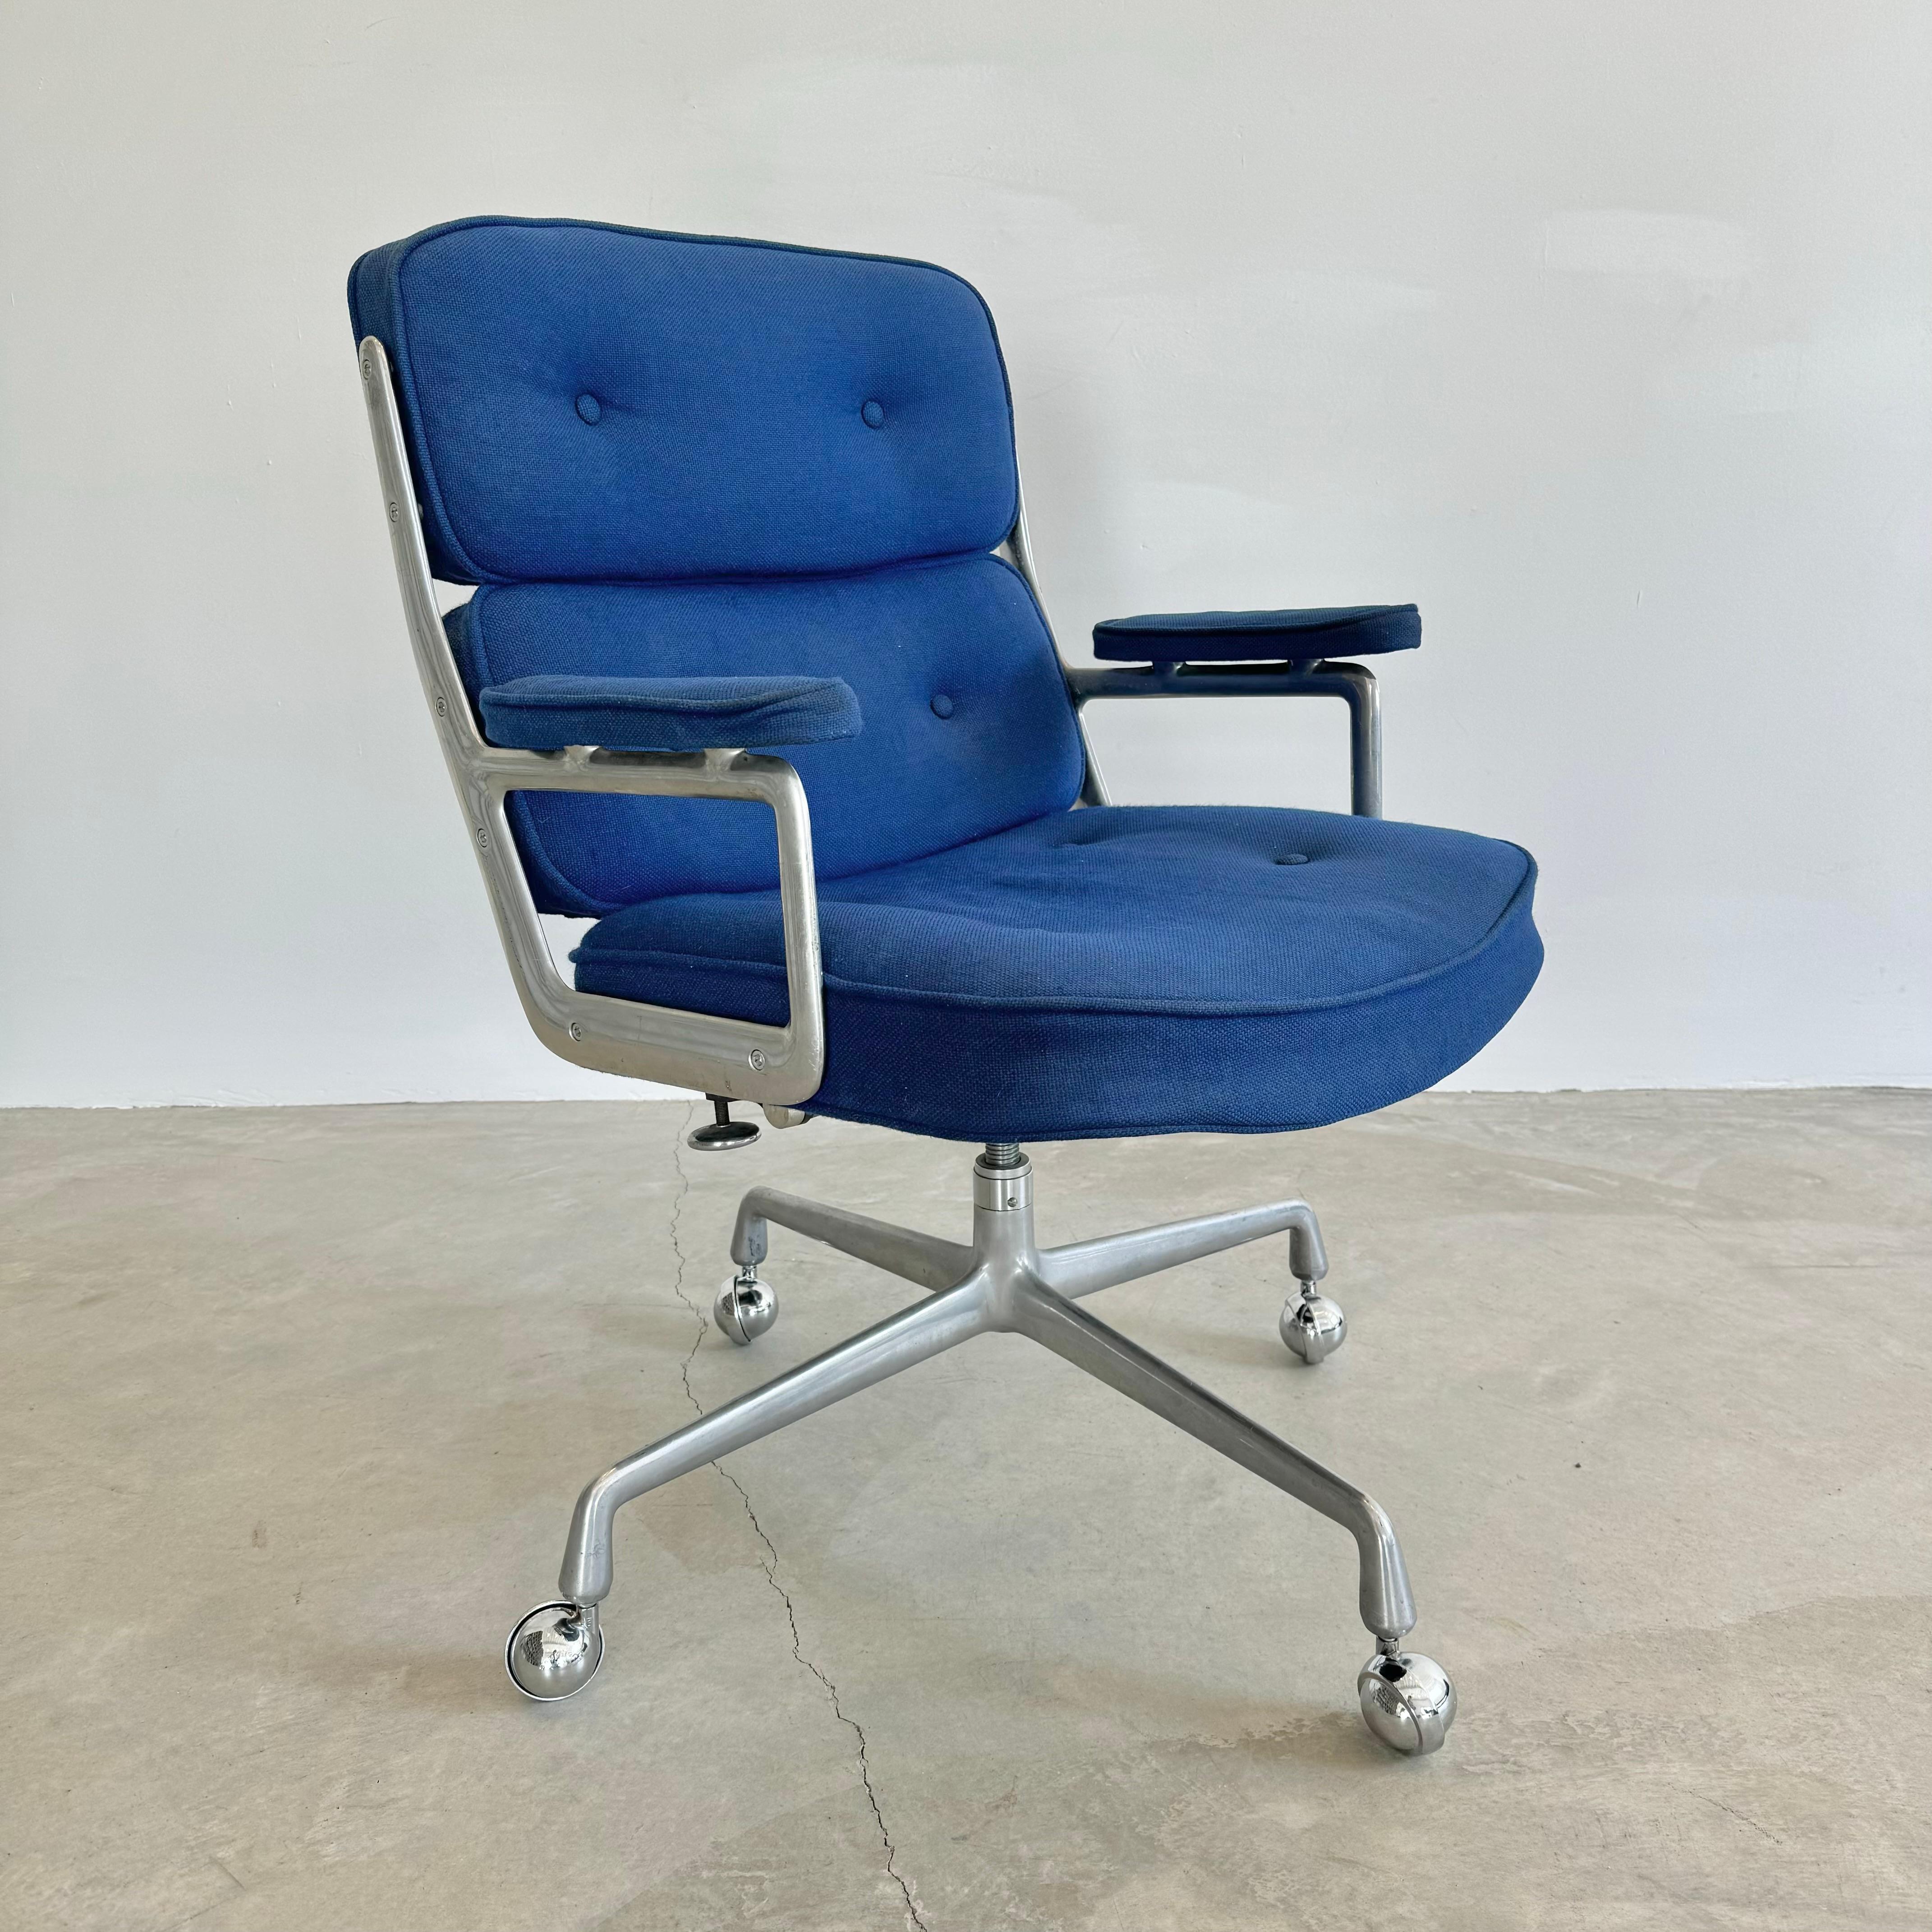 Eames Time Life Chair in Navy Blue Burlap for Herman Miller, 1978 USA For Sale 7